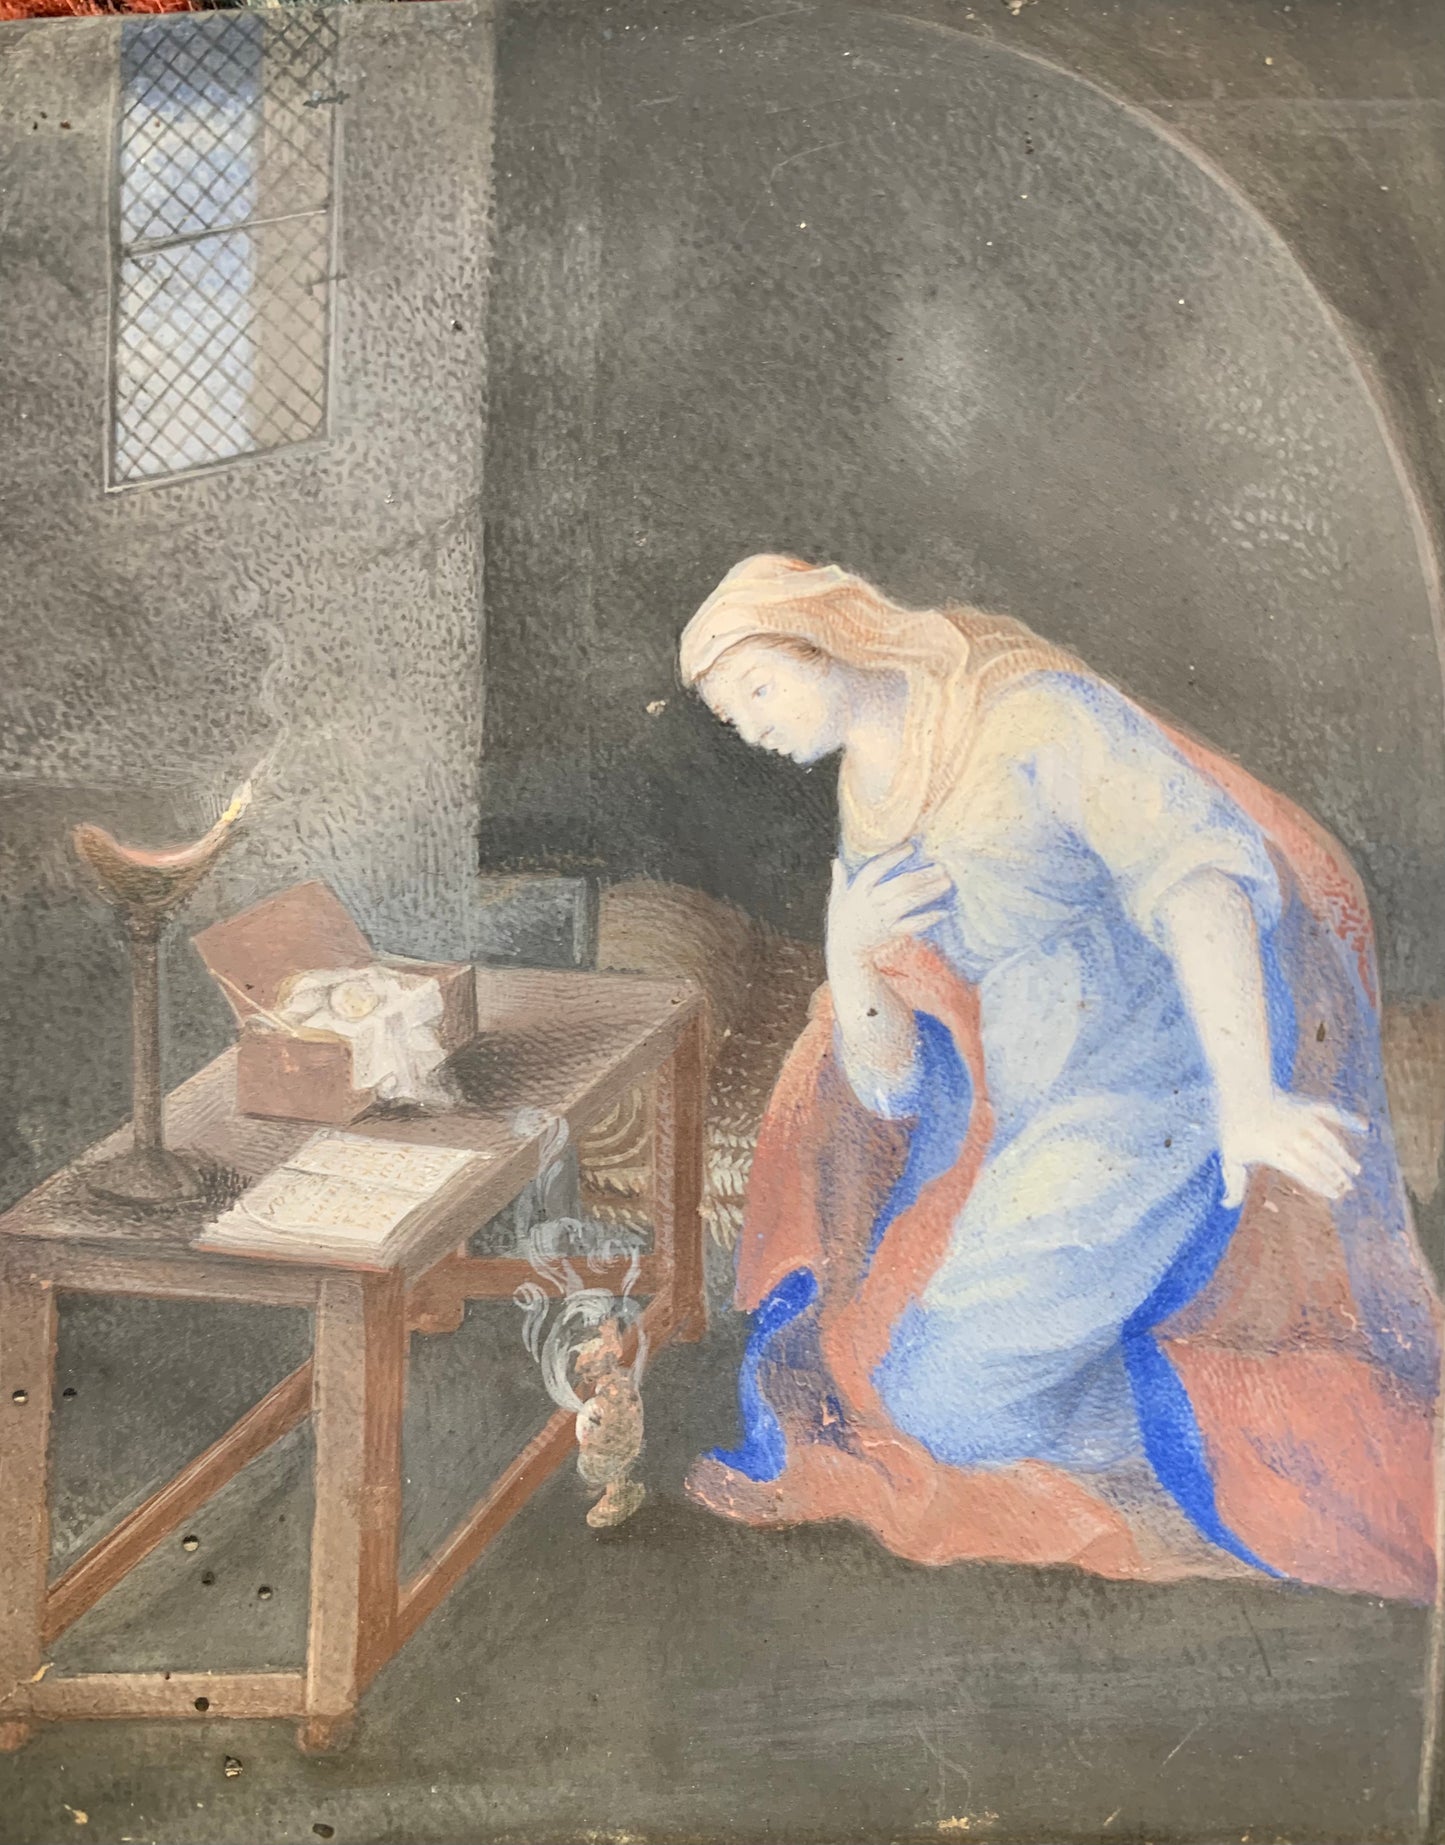 Saint Praying in the Cell with Scene of Soldiers in Armor and Arquebuses - Gouache Technique on Parchment, 17th Century Era”.